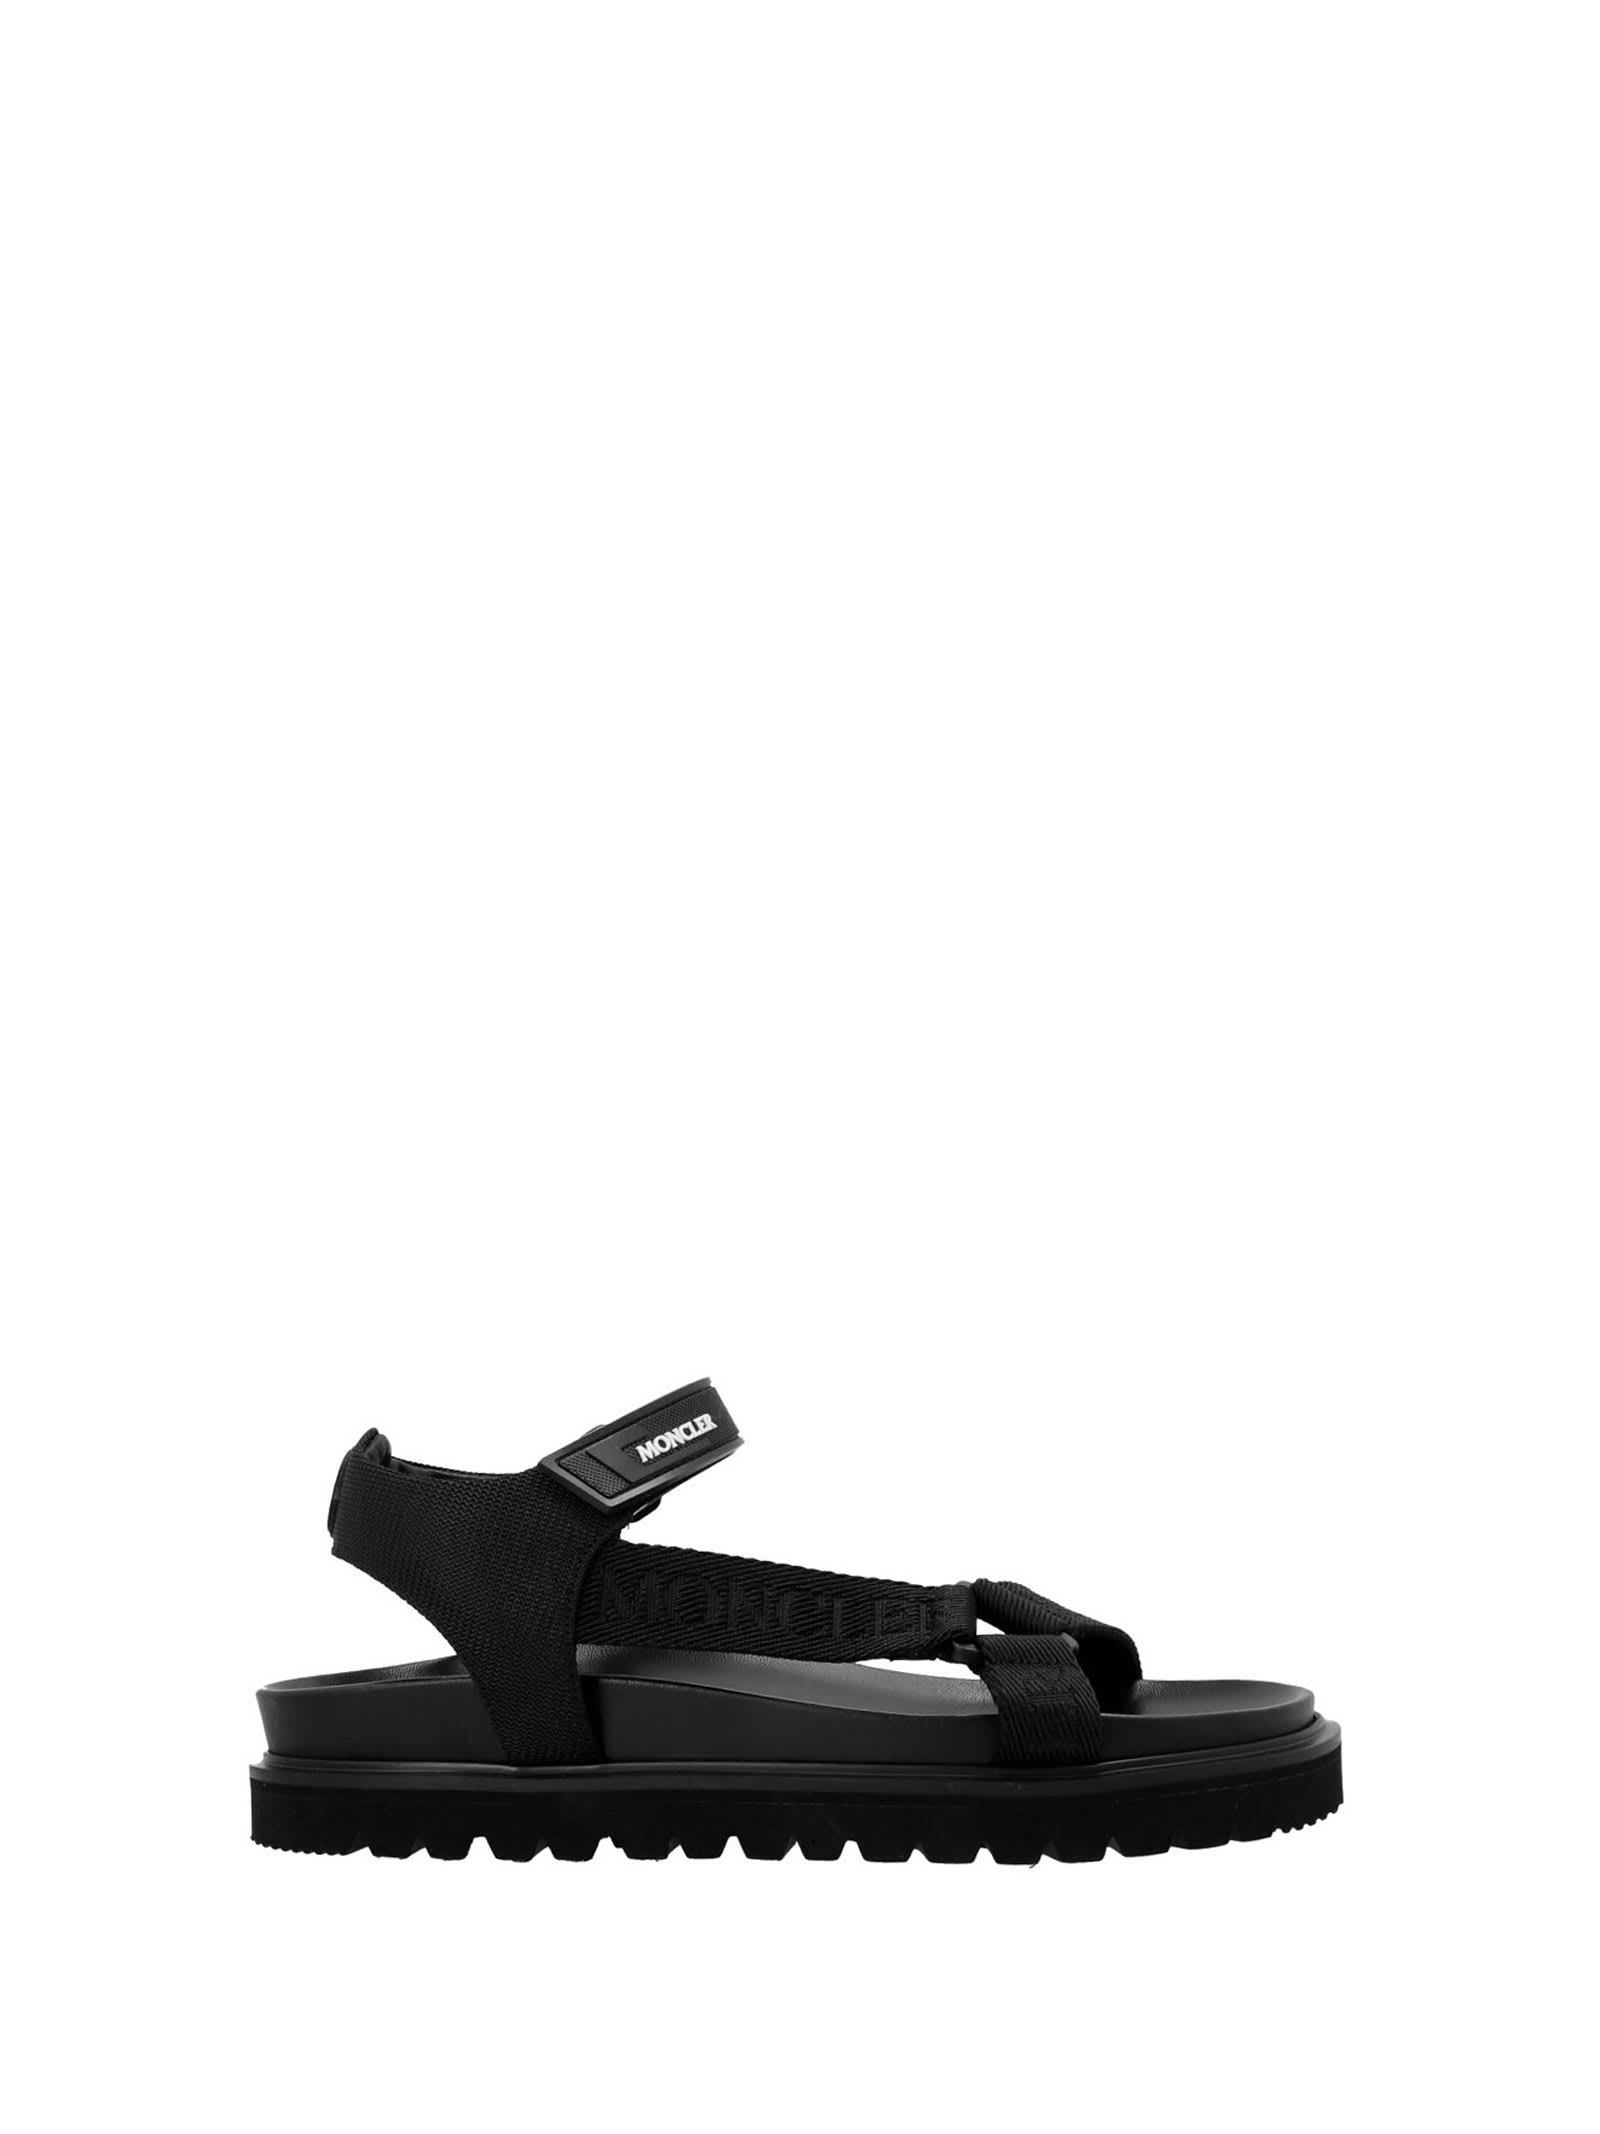 Buy Moncler Black Sandals online, shop Moncler shoes with free shipping